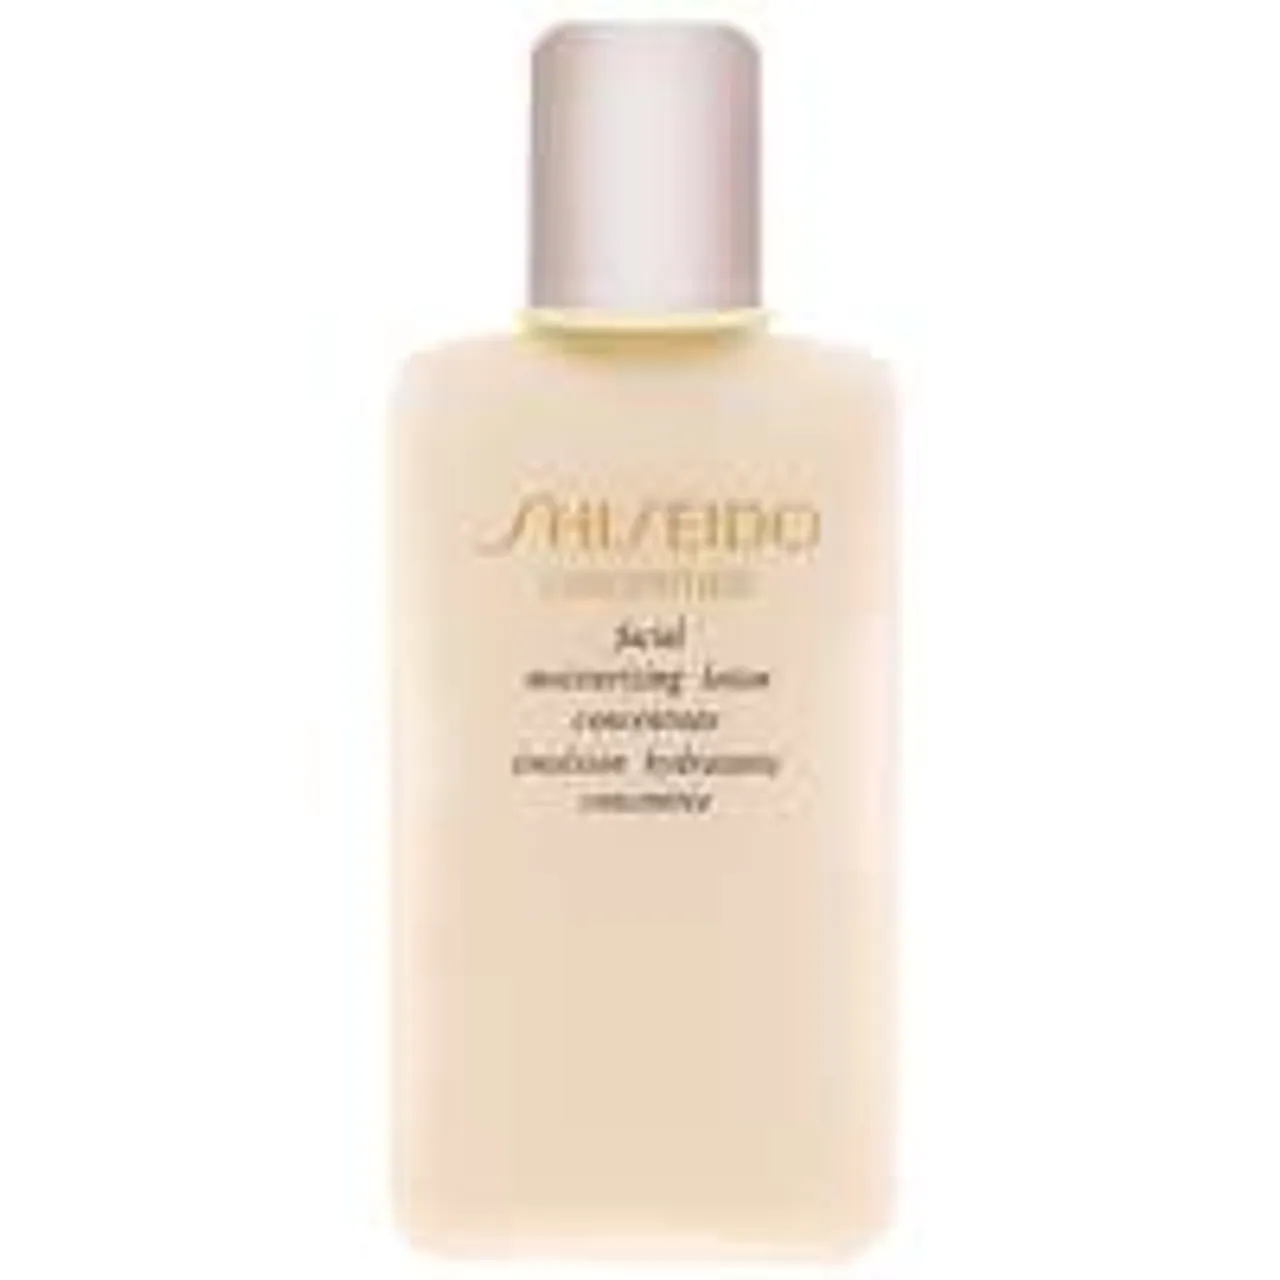 Shiseido Softeners and Lotions Concentrate: Facial Moisturizing Lotion 100ml / 3.3 fl.oz.